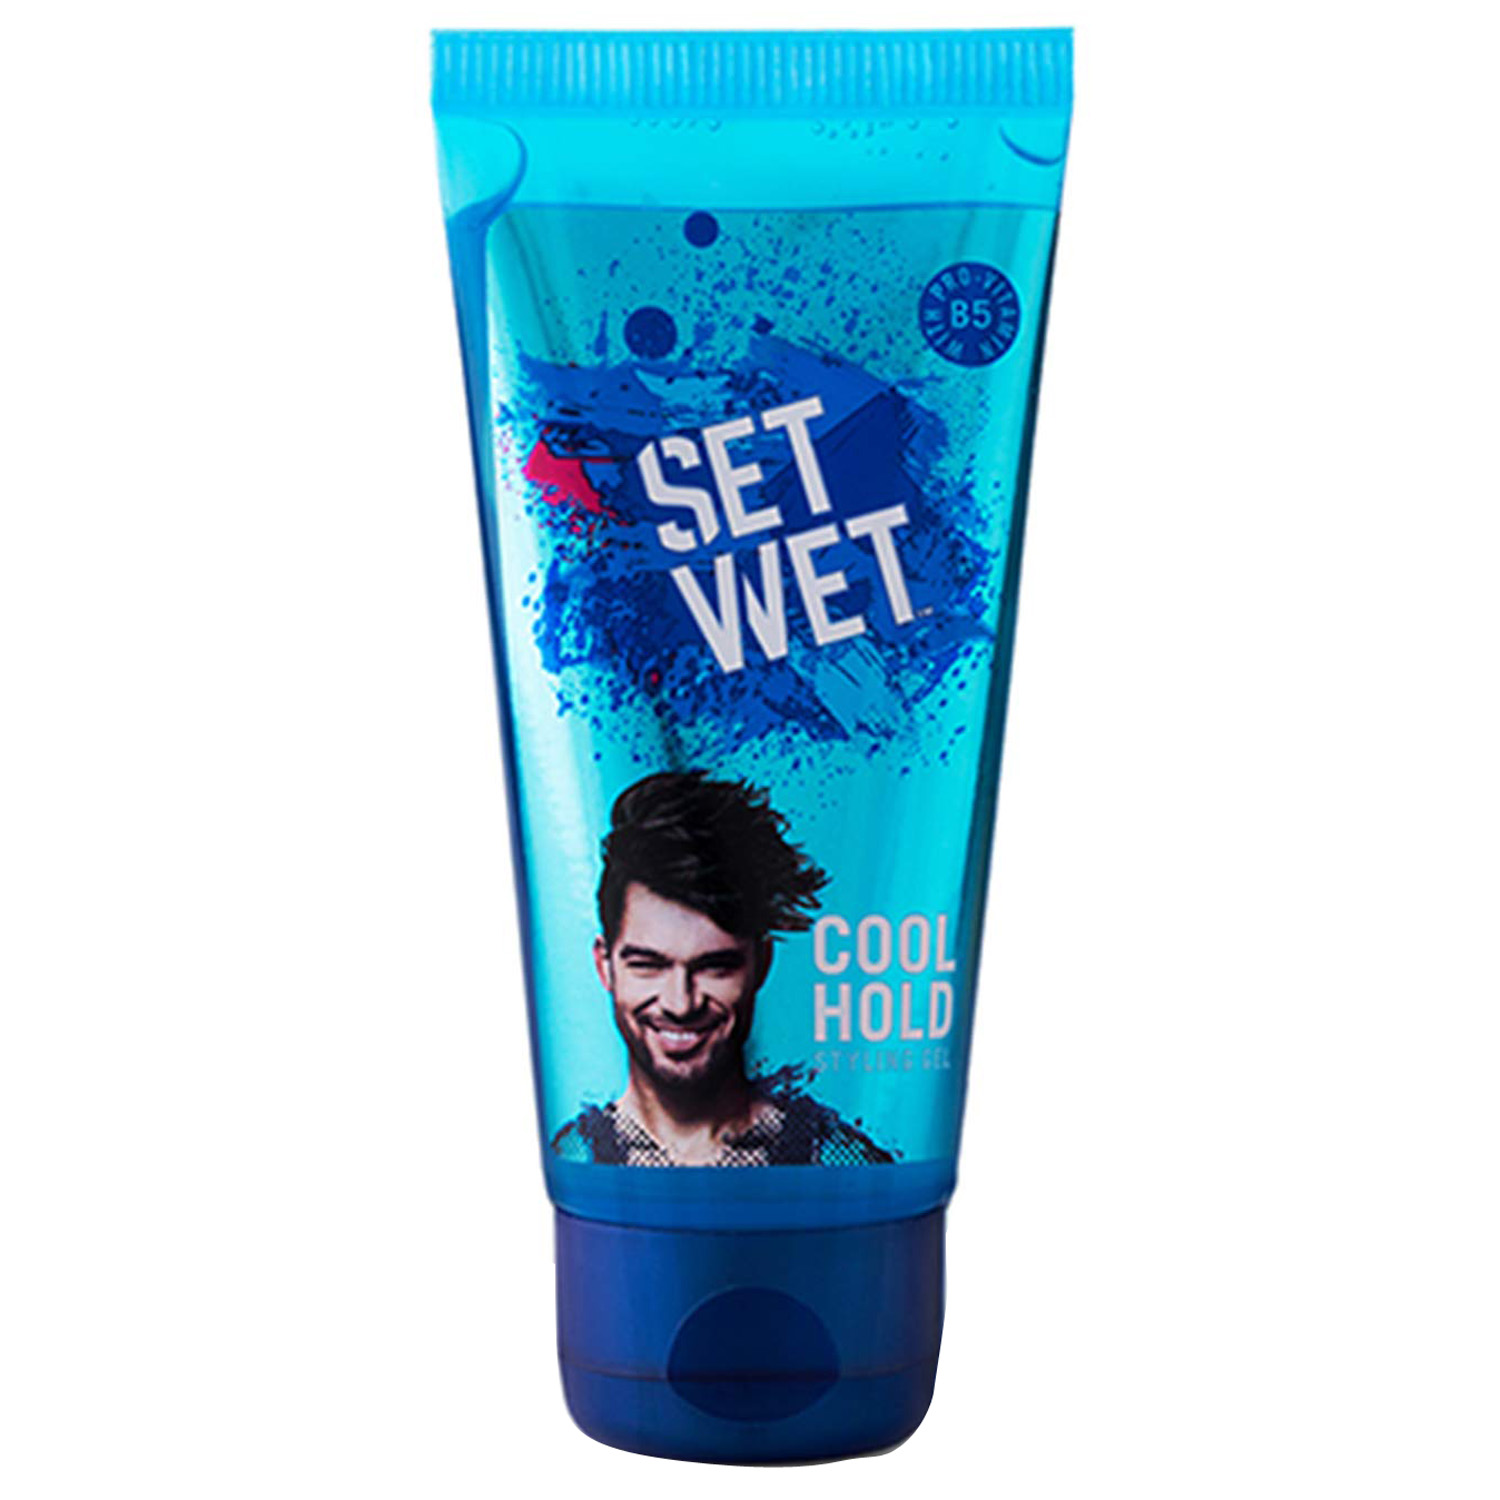 Set Wet Cool Hold Hair Styling Gel, 100 ml Price, Uses, Side Effects,  Composition - Apollo Pharmacy